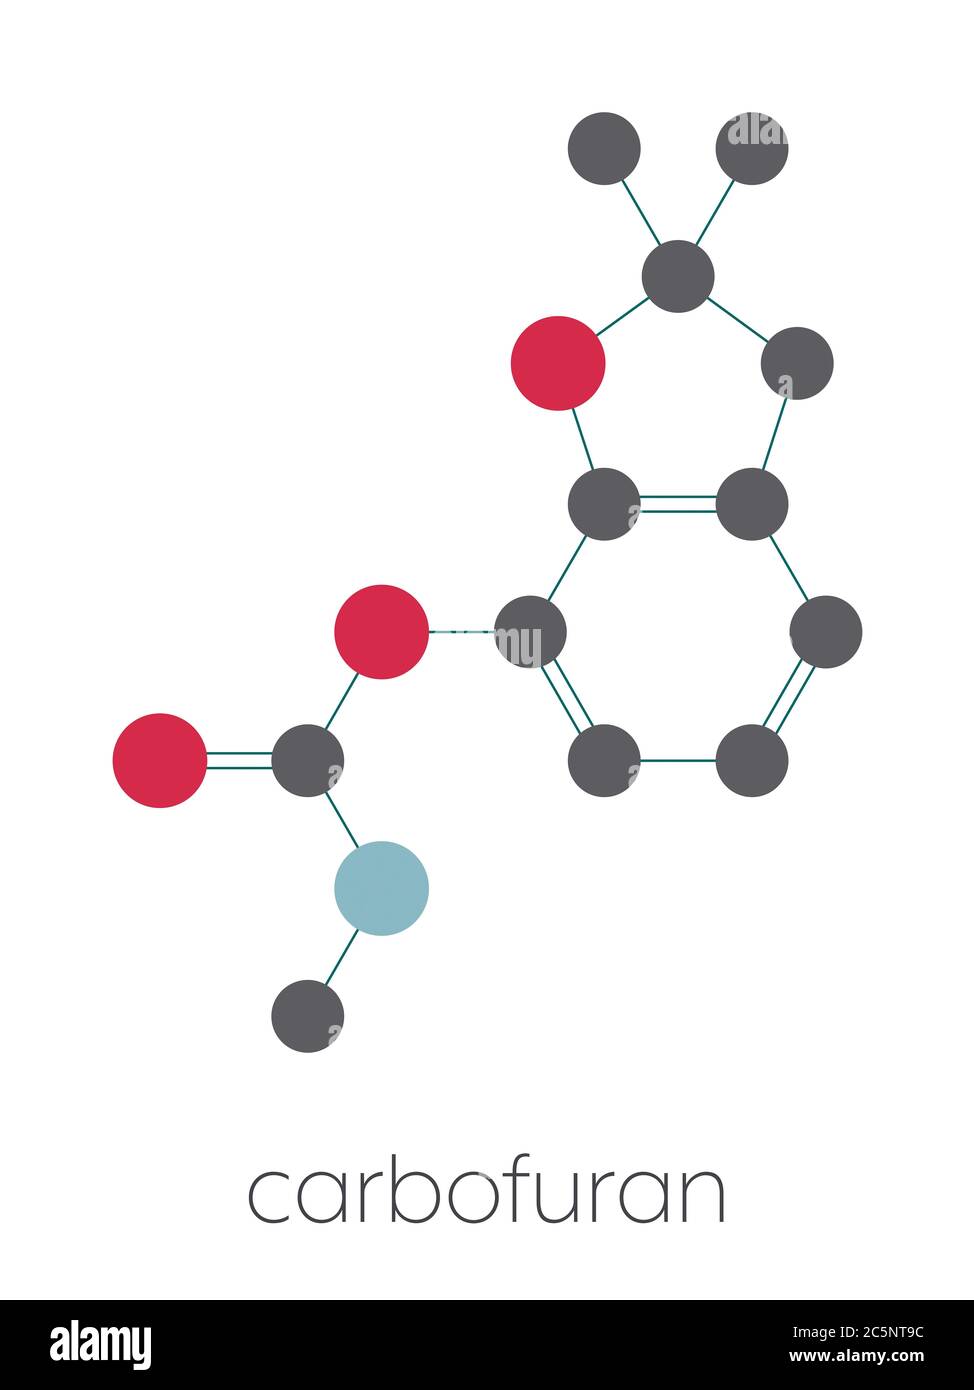 Carbofuran carbamate pesticide molecule. Insecticide that is also highly  toxic to humans and wildlife. Stylized skeletal formula (chemical  structure): Atoms are shown as color-coded circles: hydrogen (hidden),  carbon (grey), nitrogen (blue), oxygen (